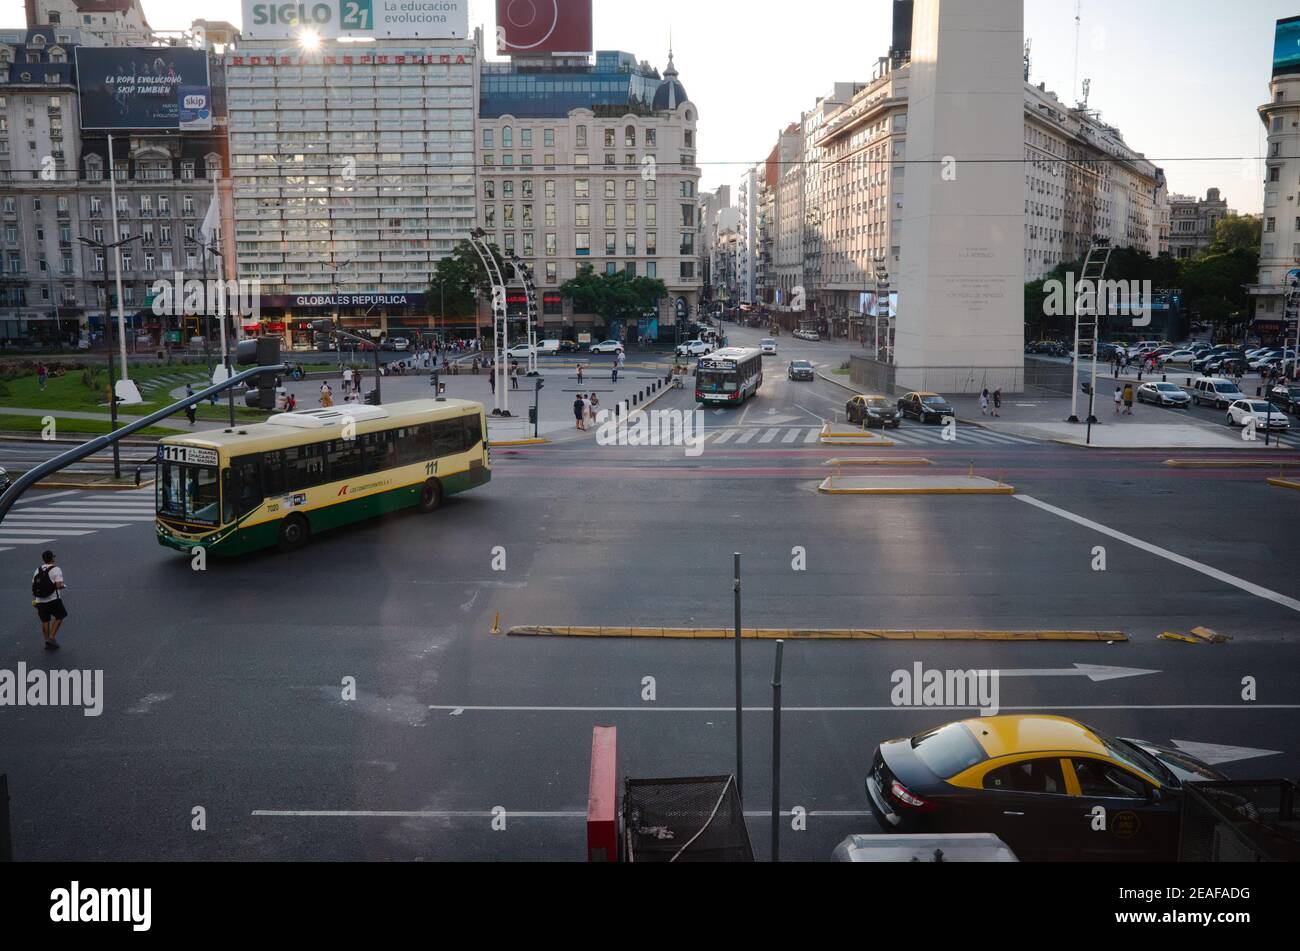 Buenos Aires, Argentina - January, 2020: Plaza de la Republica view with Obelisco de Buenos Aires. Traffic with public buses and cars on Republic Squa Stock Photo